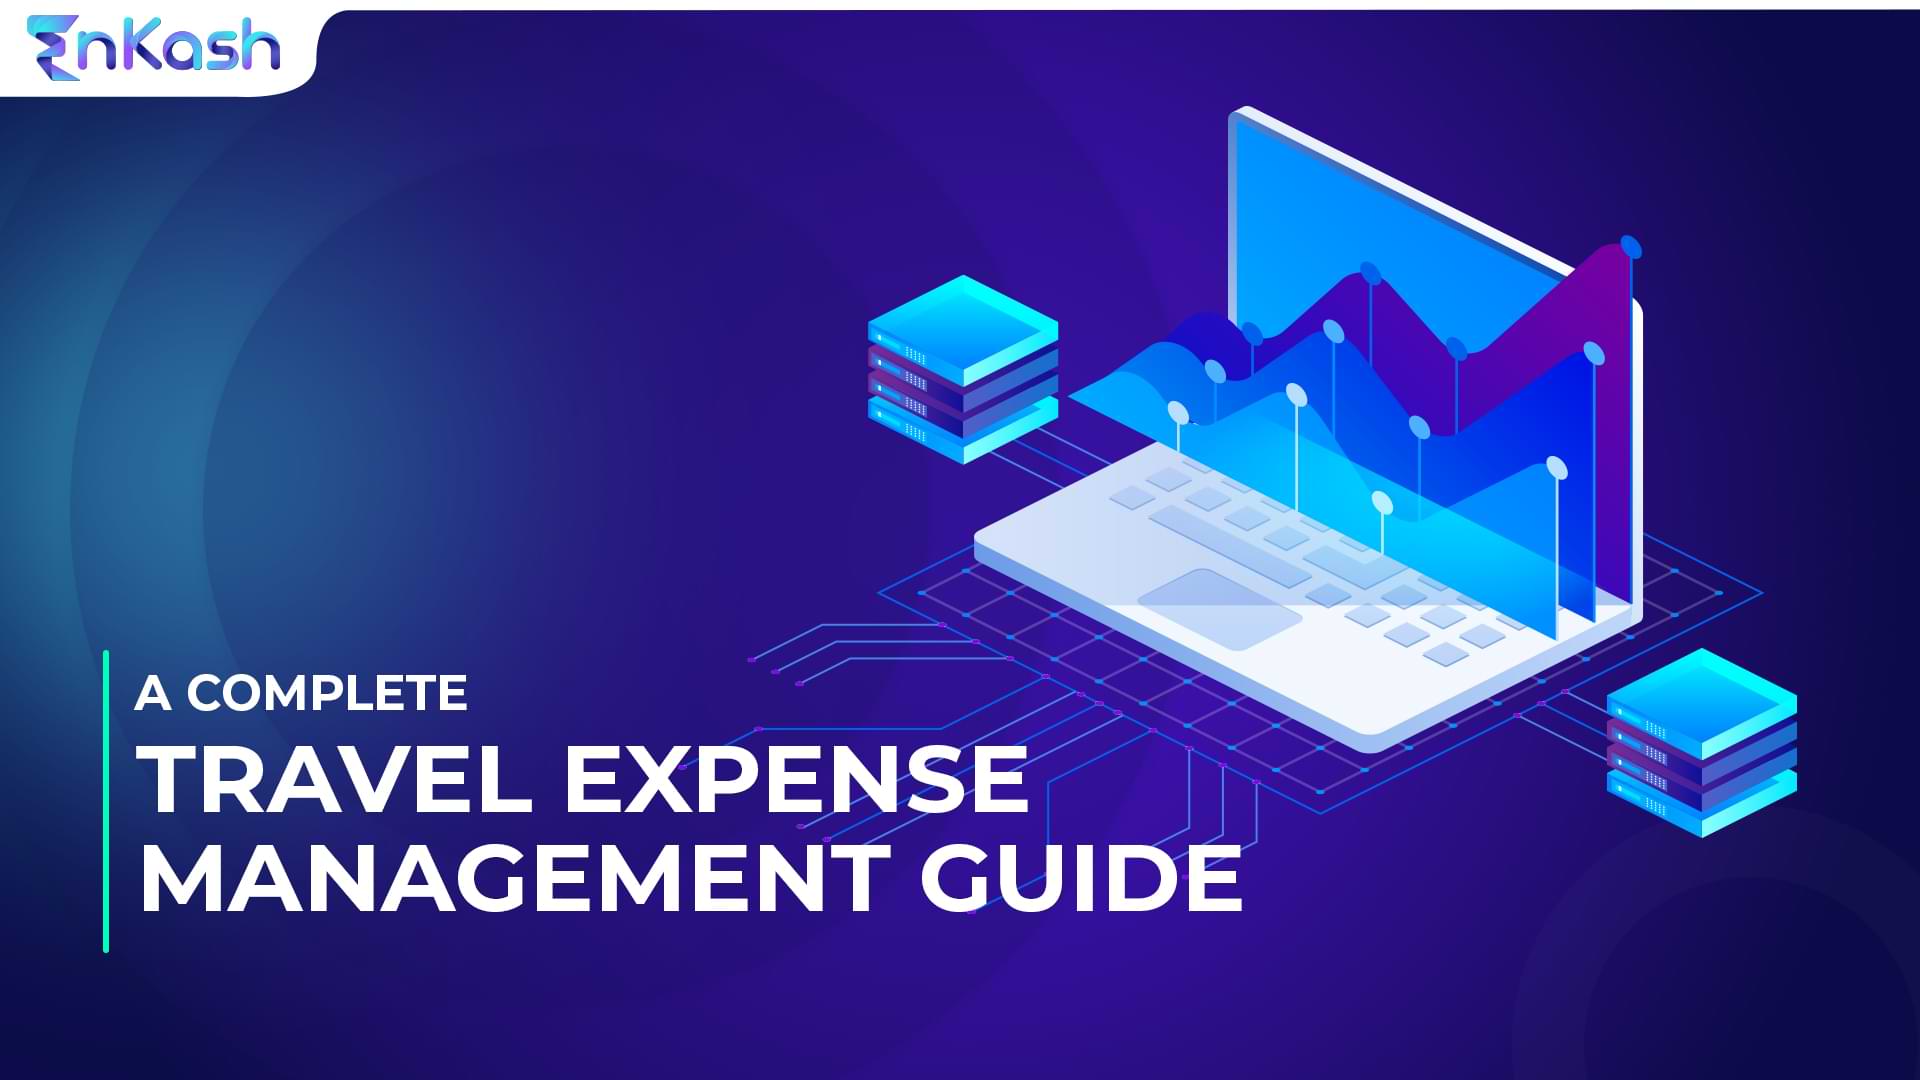 Travel and expense management